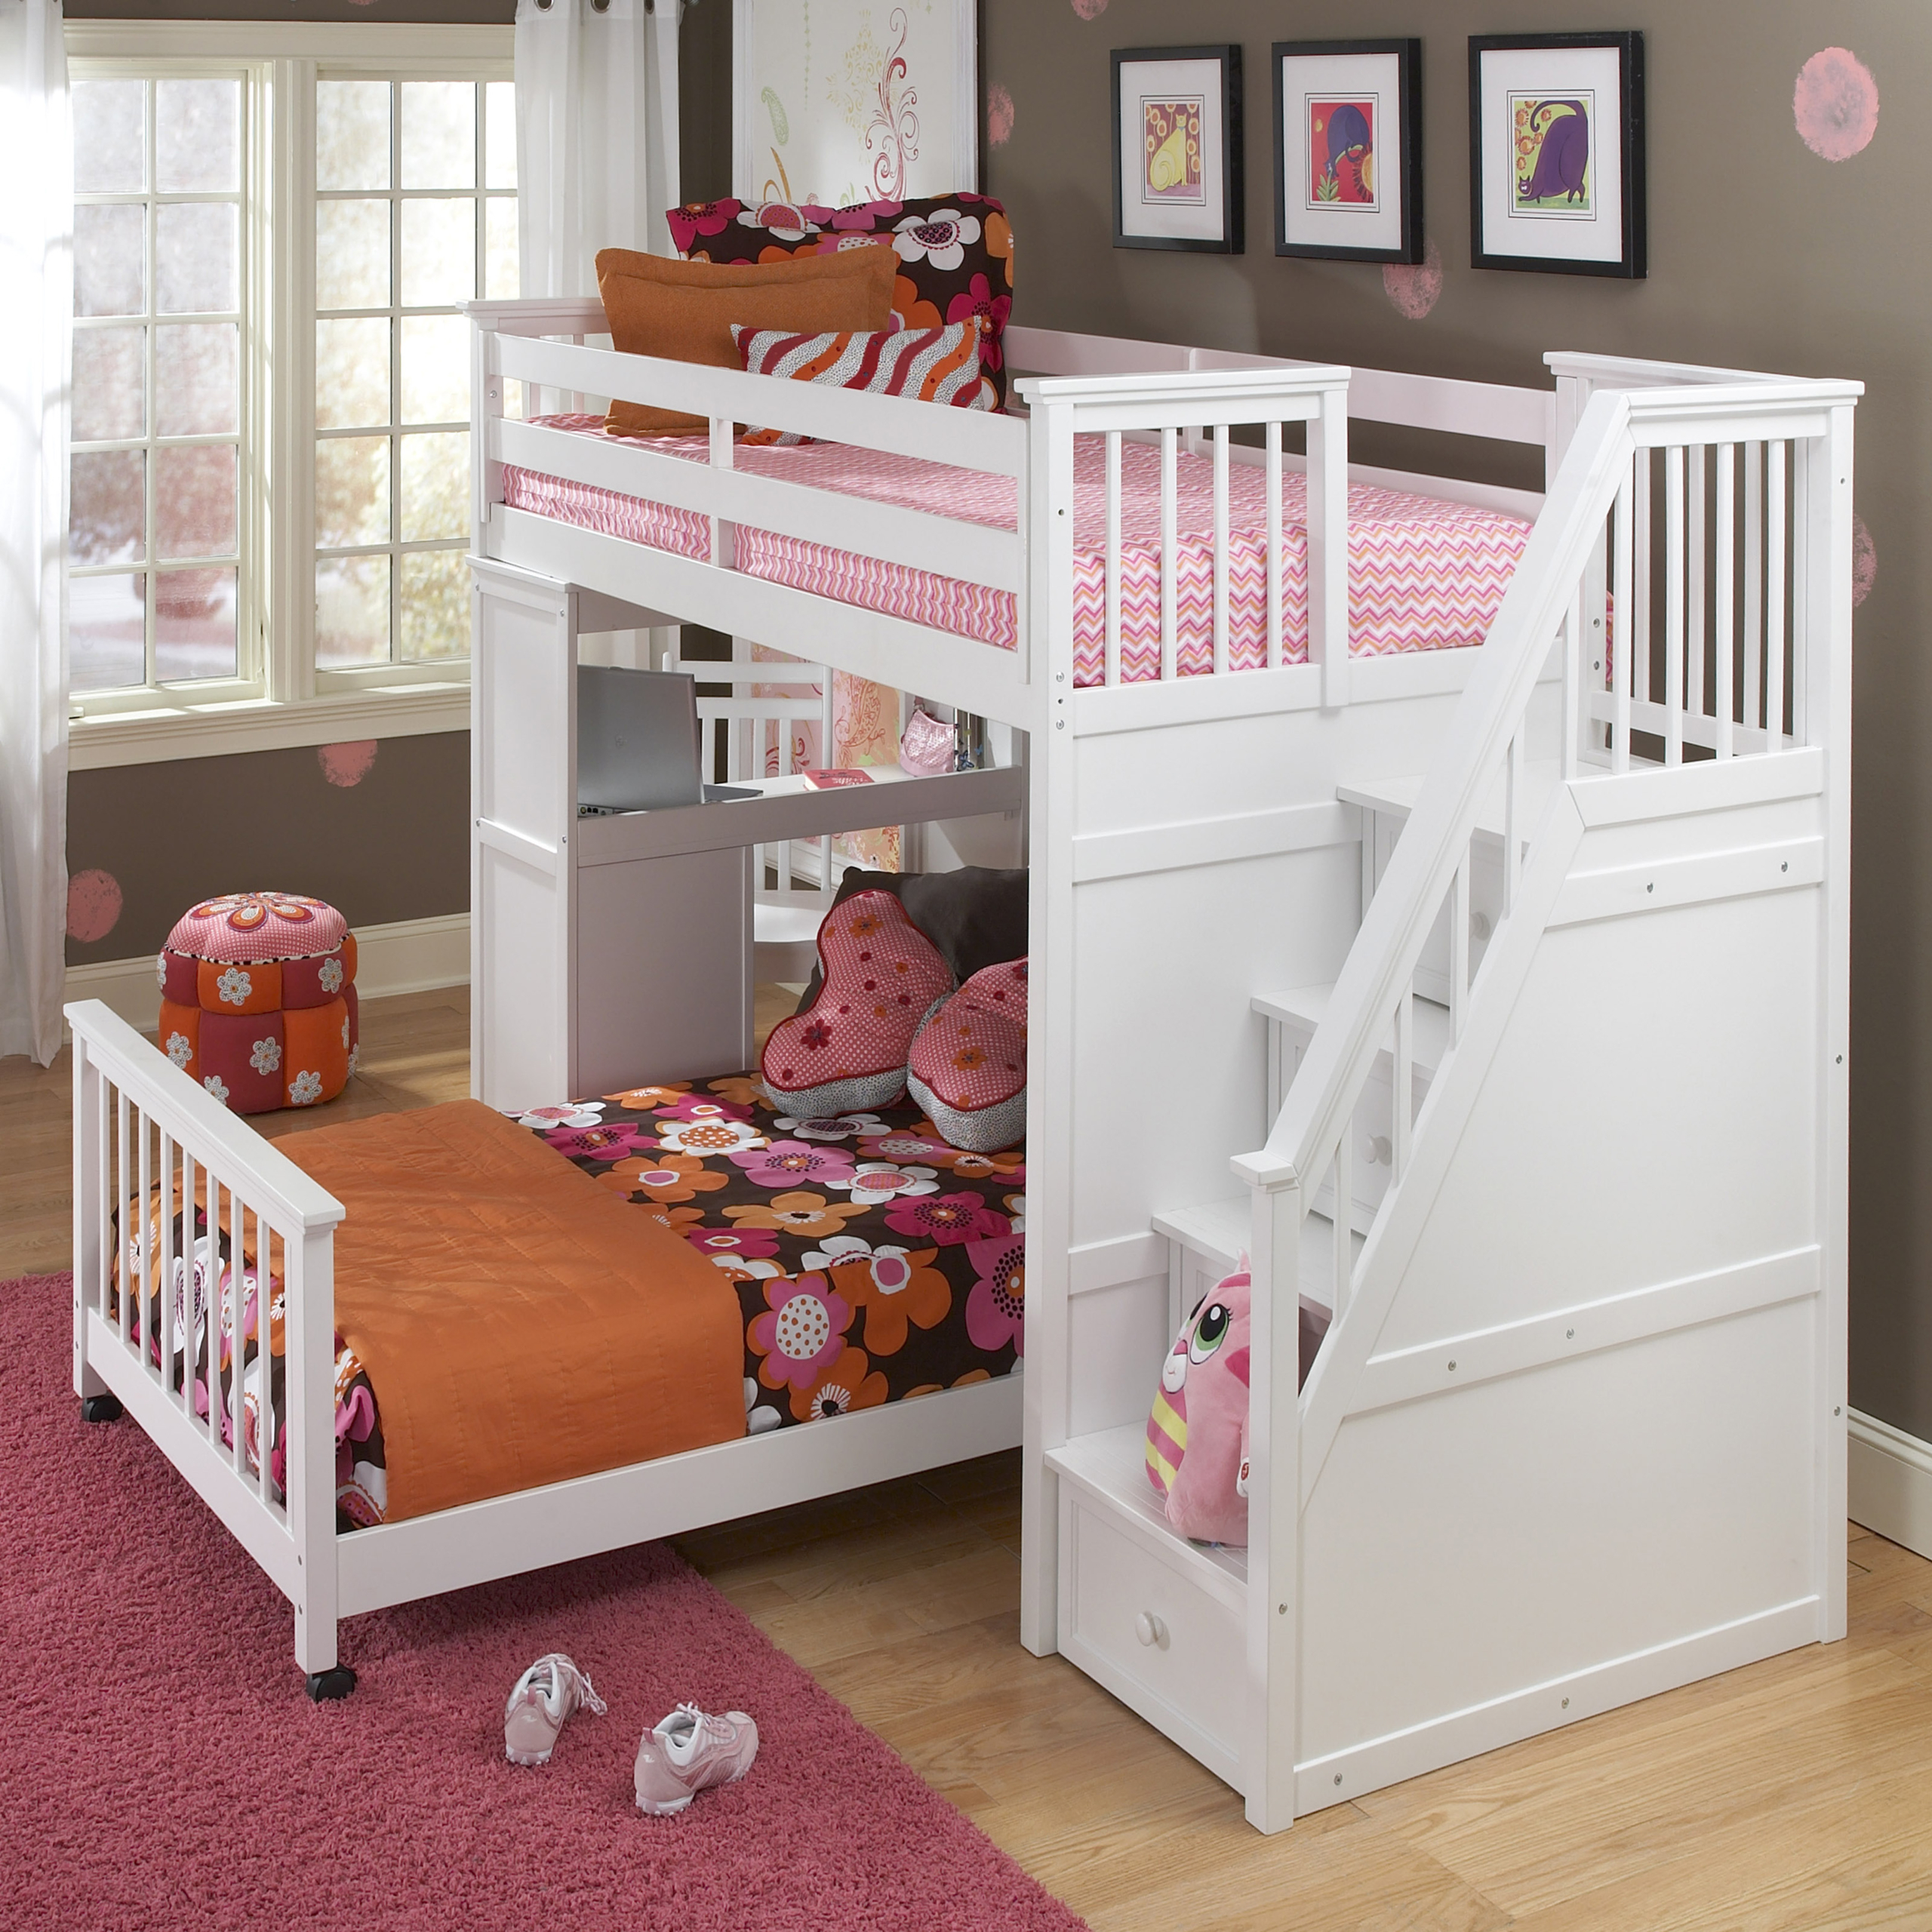 Creative ideas for loft beds for kids